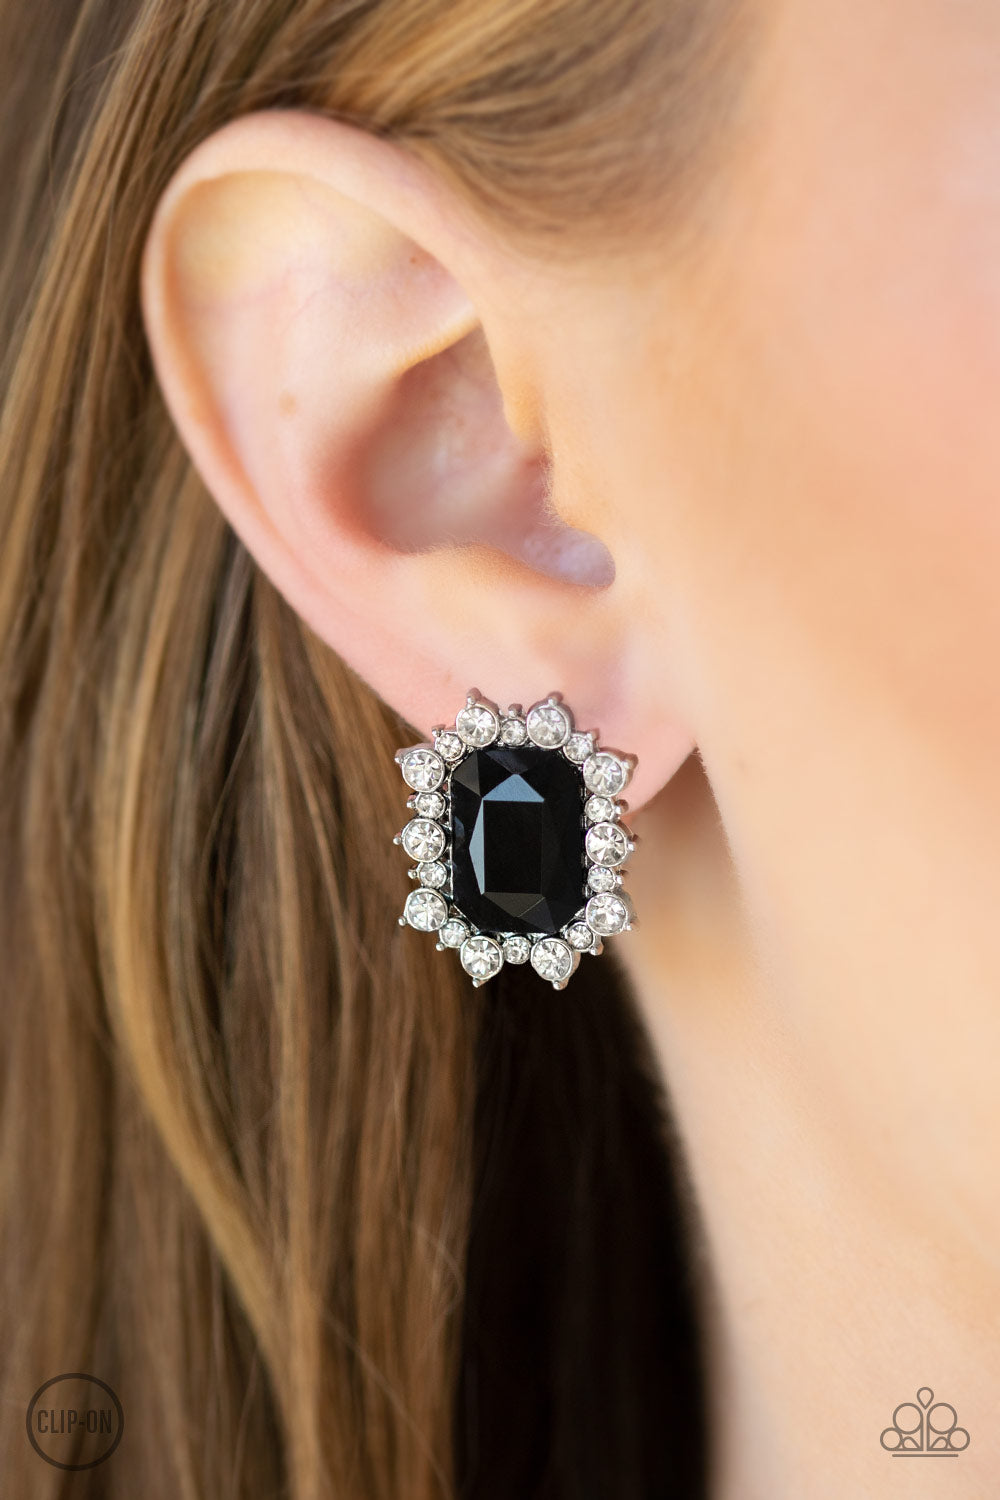 Prime Time Shimmer - Black Item #E381 A border of glassy white rhinestones spin around a regal emerald-cut black rhinestone center for a refined look. Earring attaches to a standard clip-on fitting. All Paparazzi Accessories are lead free and nickel free!  Sold as one pair of clip-on earrings.